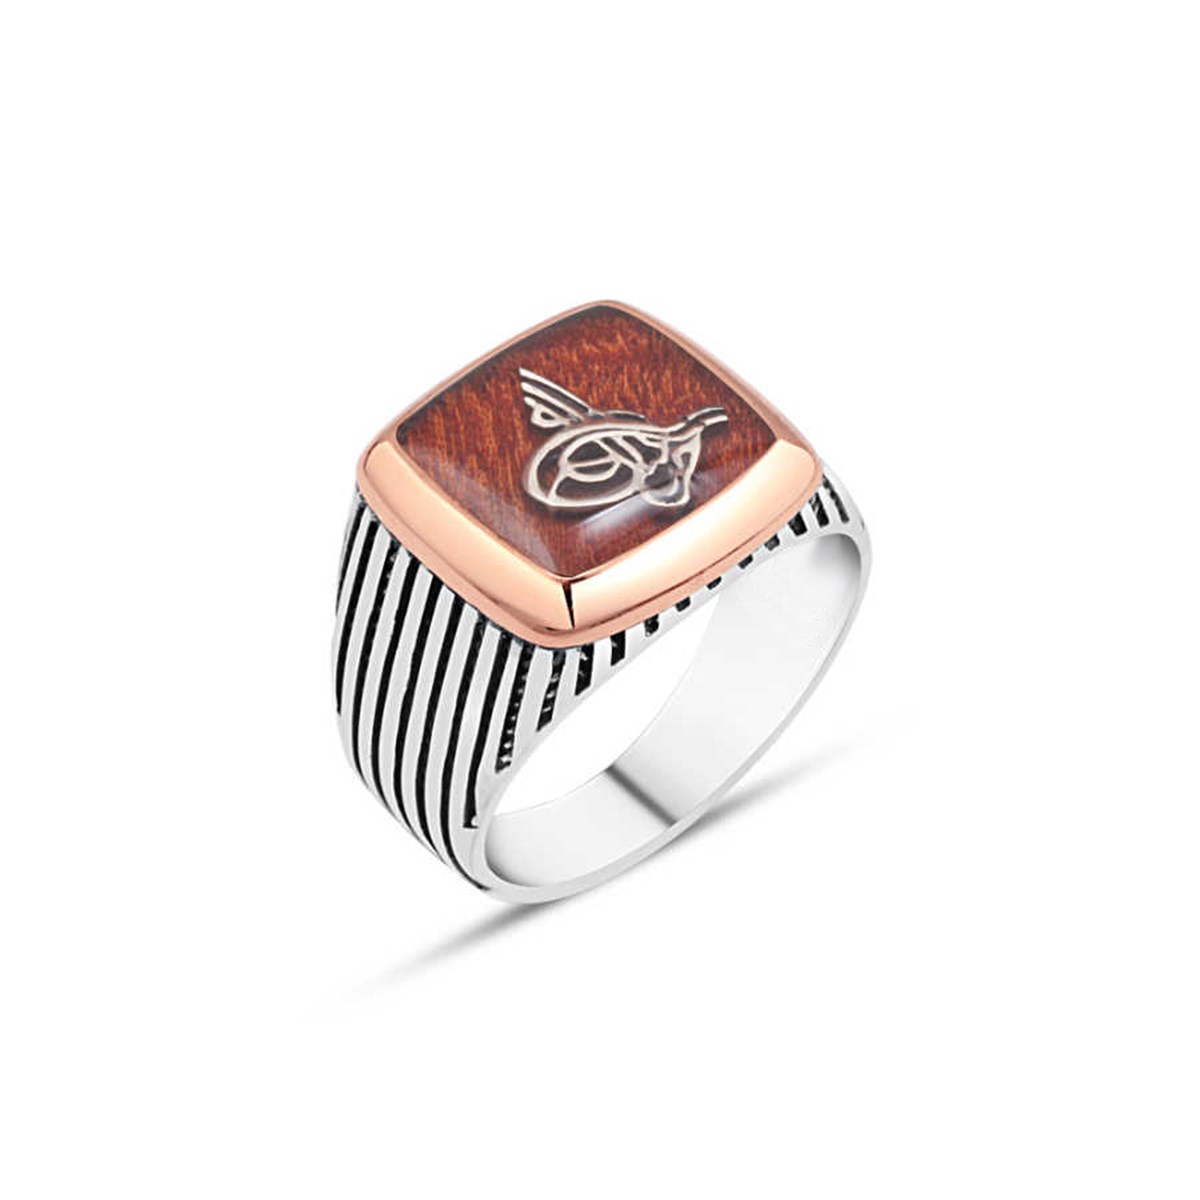 Sterling Silver Men's Ring with Enamel Tugra on Wood